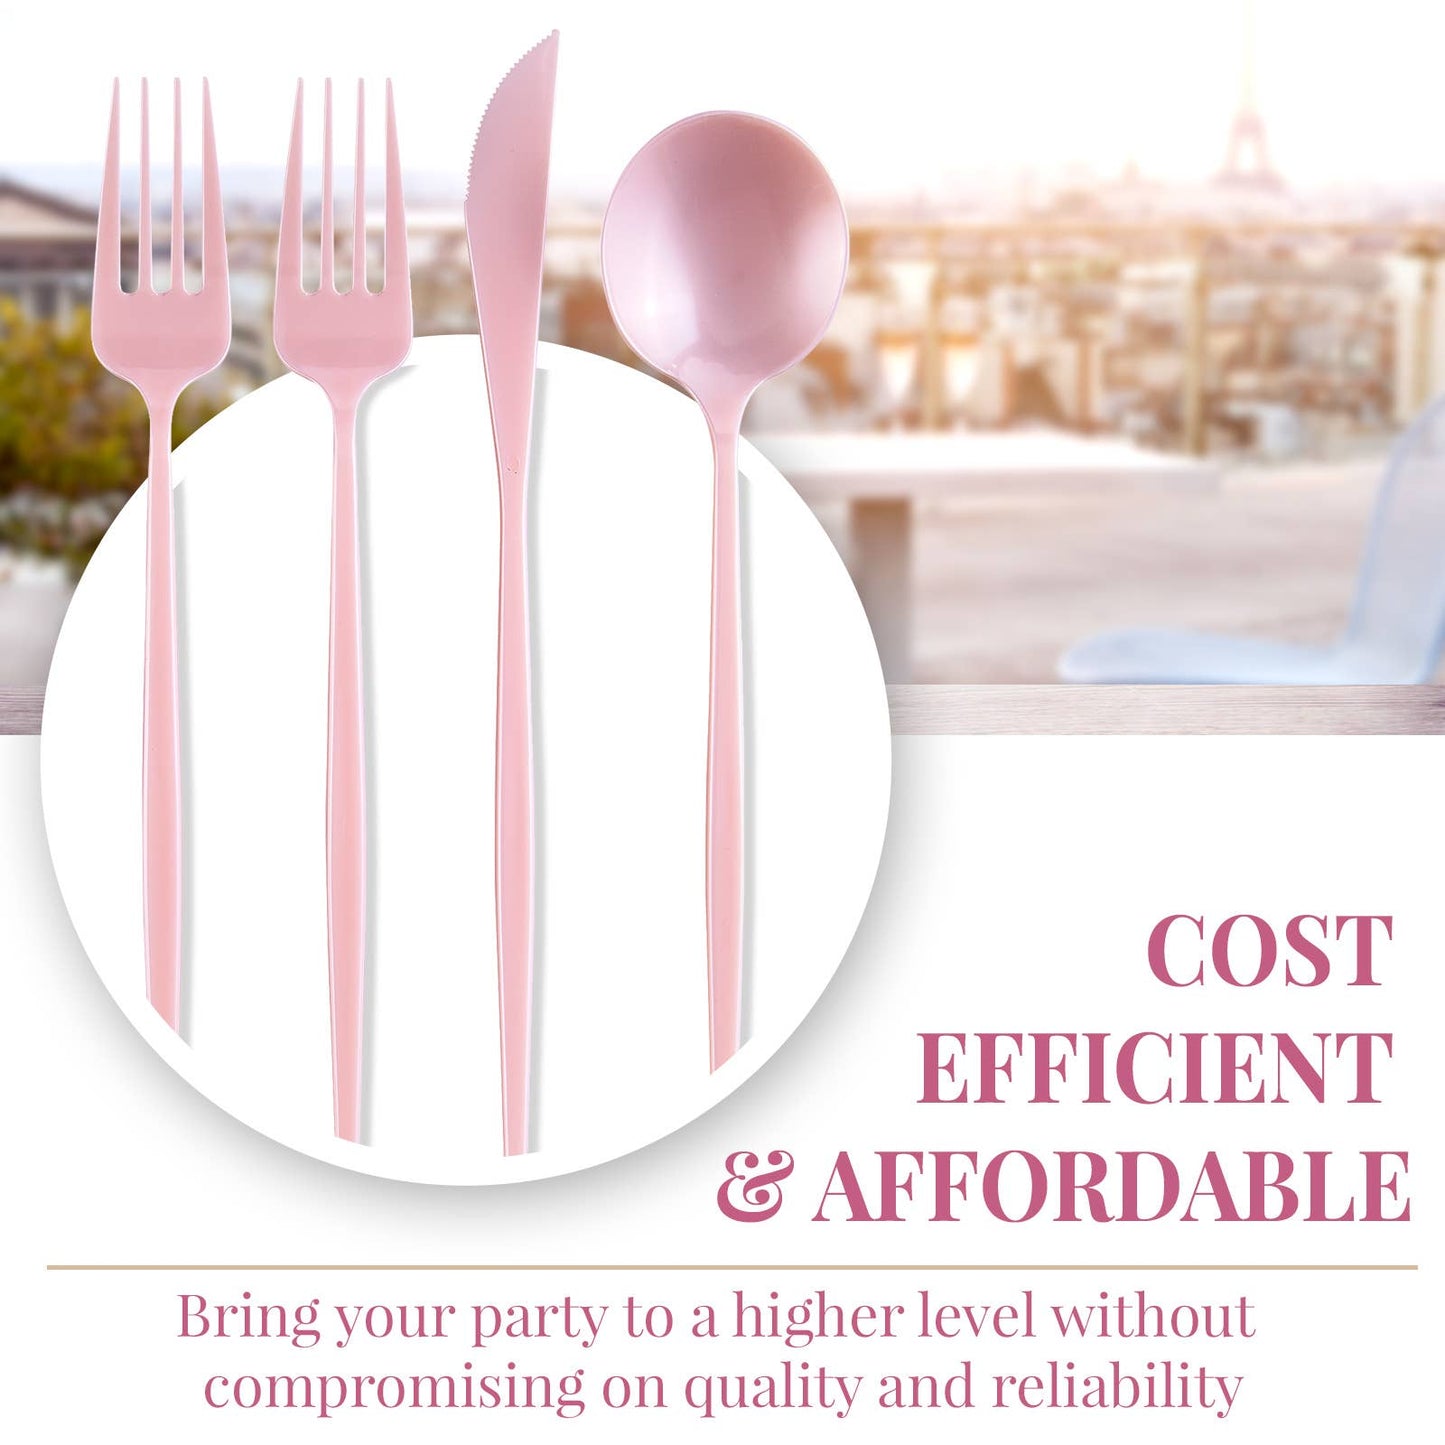 Opulence Disposable Flatware Set for Weddings - 80 PC - Pink